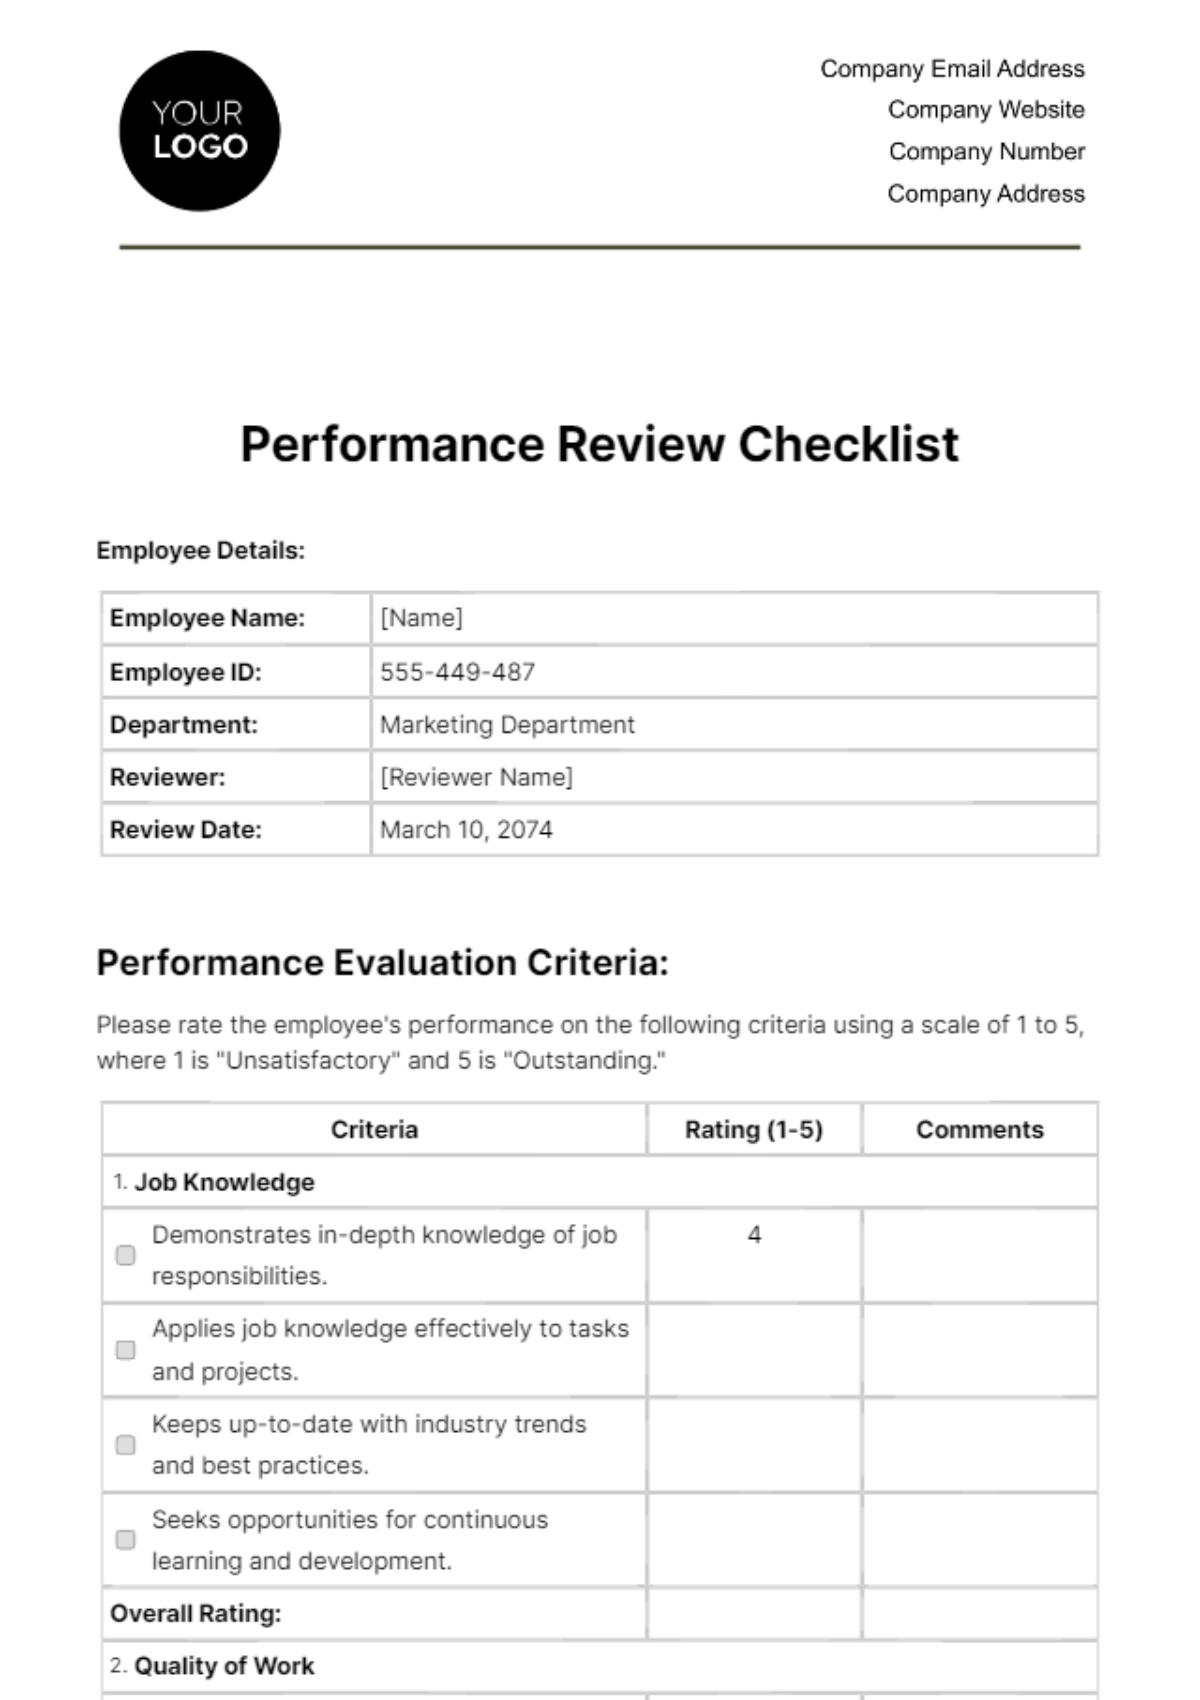 Free Performance Review Checklist HR Template